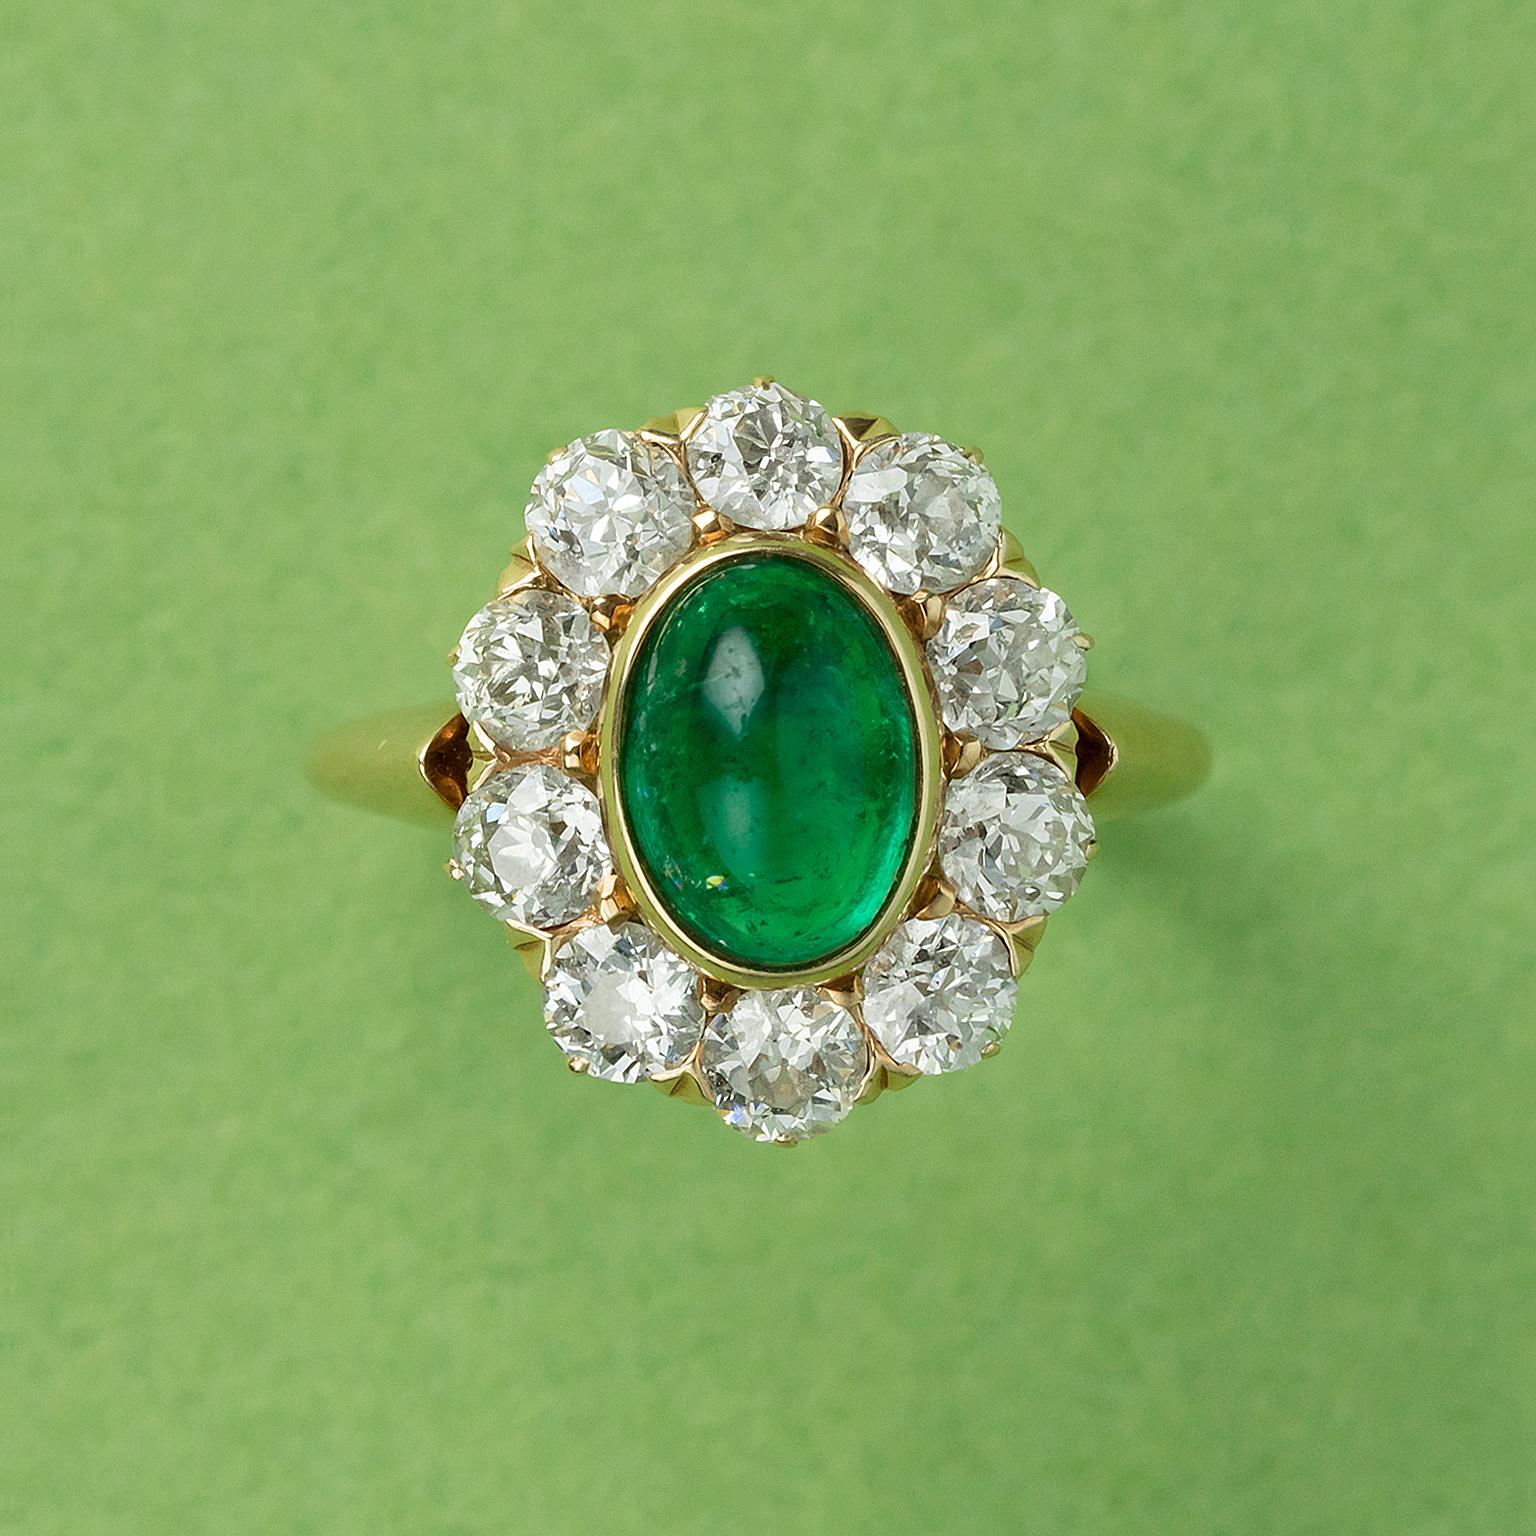 An 18 carat yellow gold cluster ring bezel set oval cabochon cut emerald (1.54 carat, Colombian minor) with ten old cut diamonds surround (circa 1.5 carat), American, circa 1910.

weight: 9.30 grams
ring  size: 17+ mm / 6 ¾ US.
width: 1.2 – 16 mm